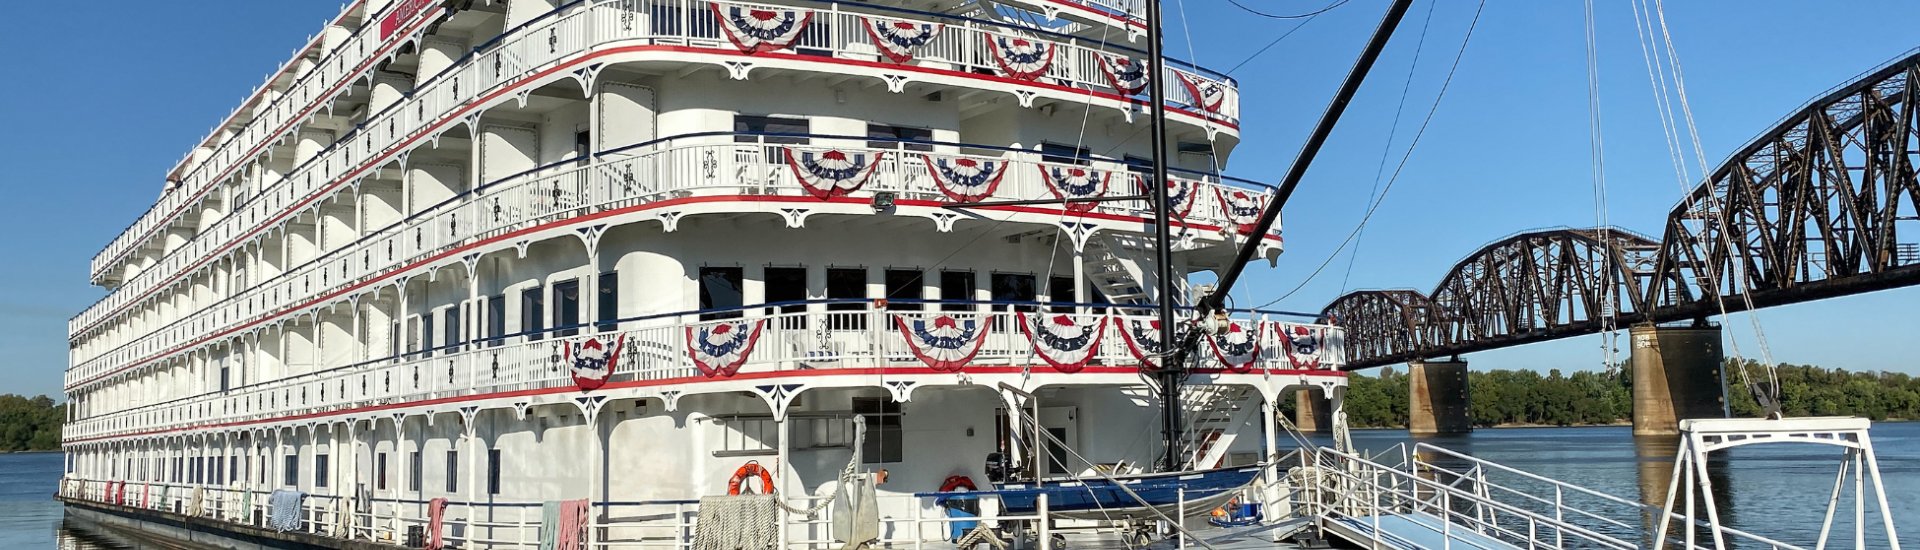 luxury cruises down the mississippi